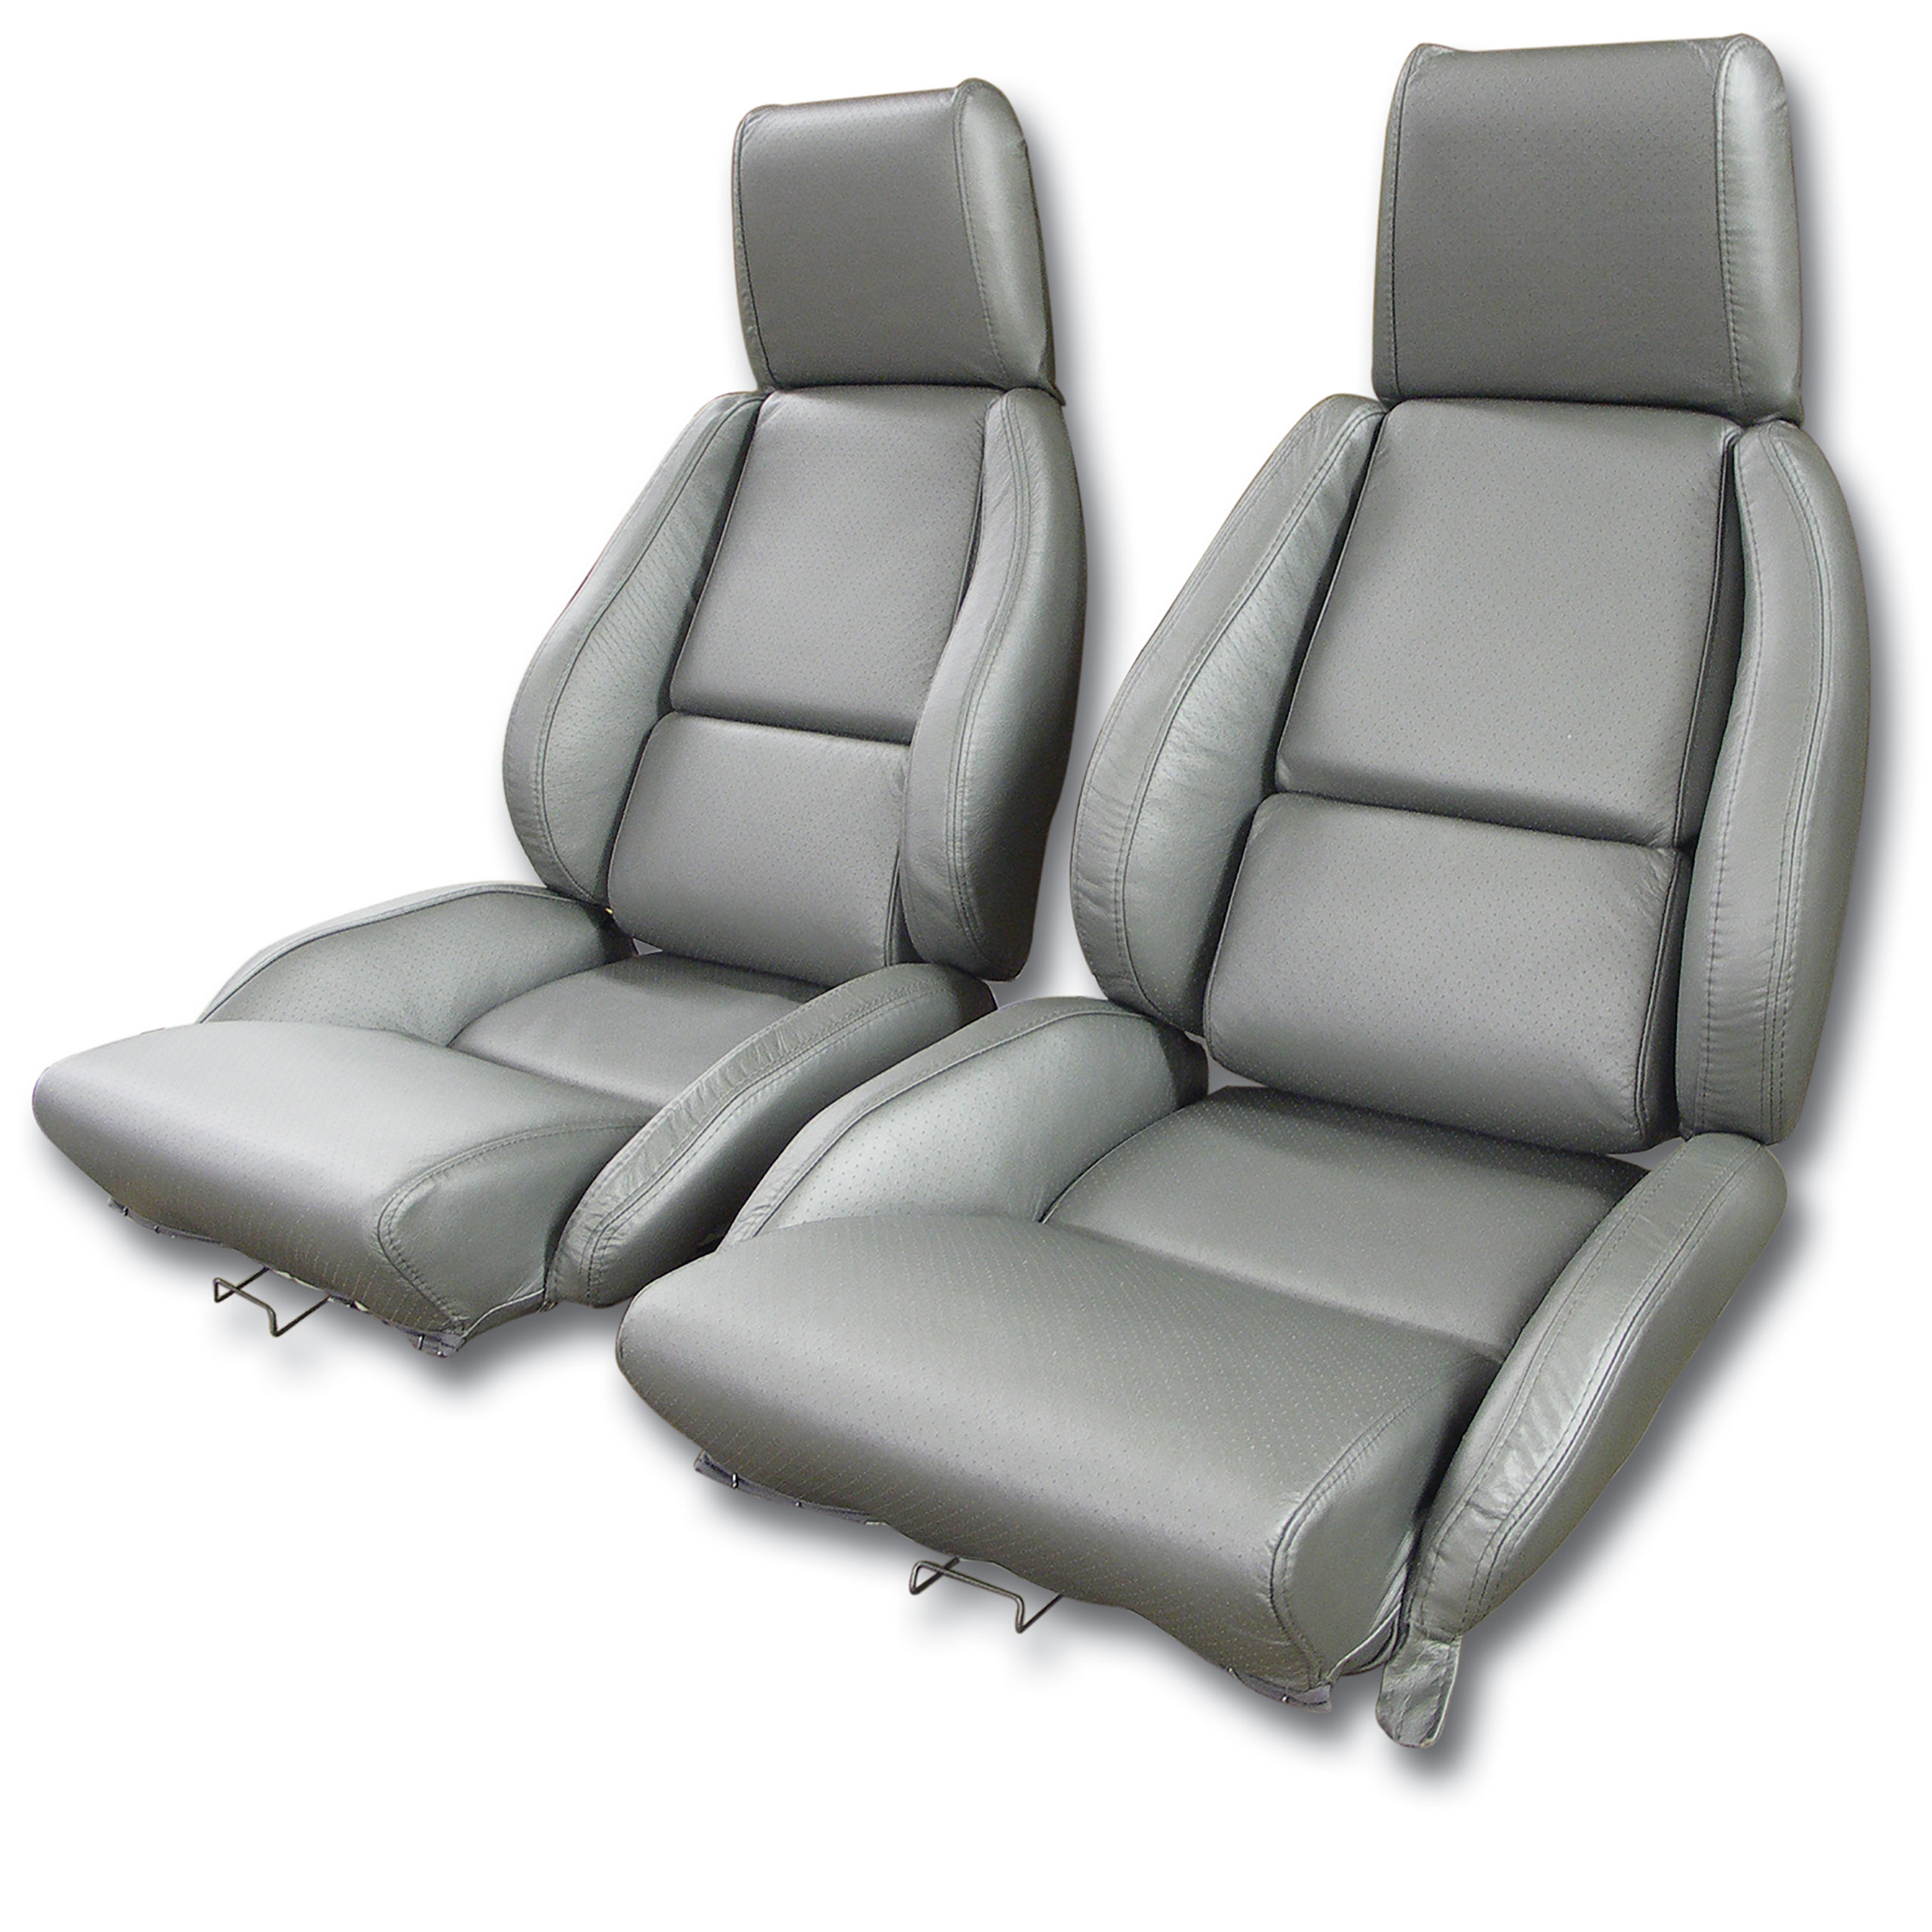 1984-1987 C4 Corvette Mounted Leather Seat Covers Gray Standard